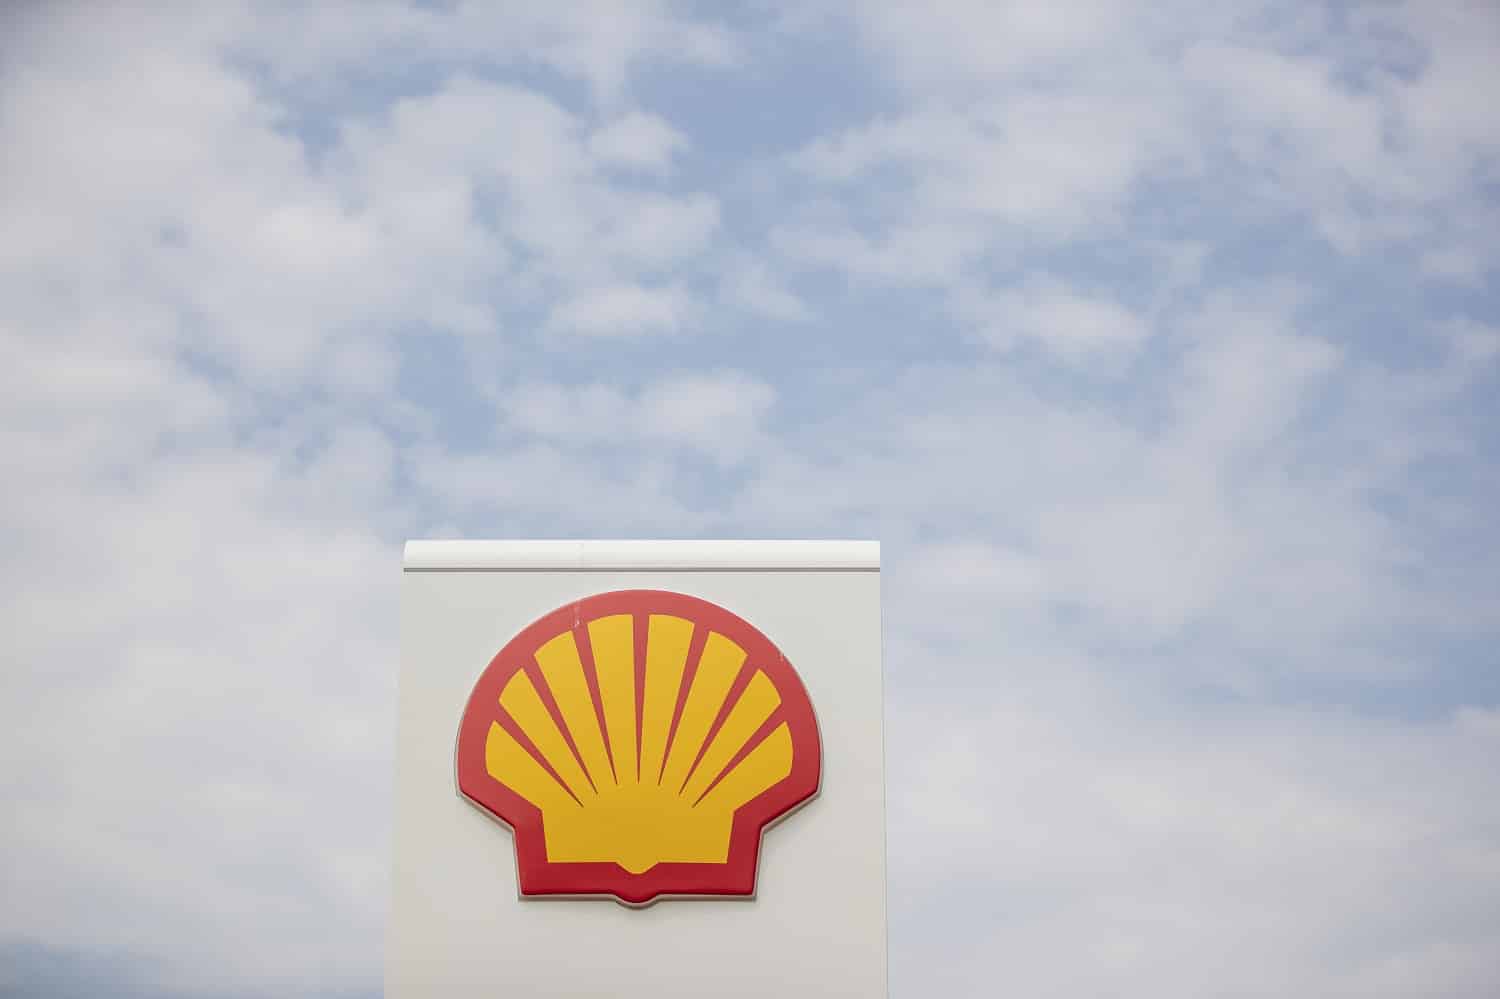 Shell's LNG liquefaction volume in Egypt hits 300,000 tons in 2023

